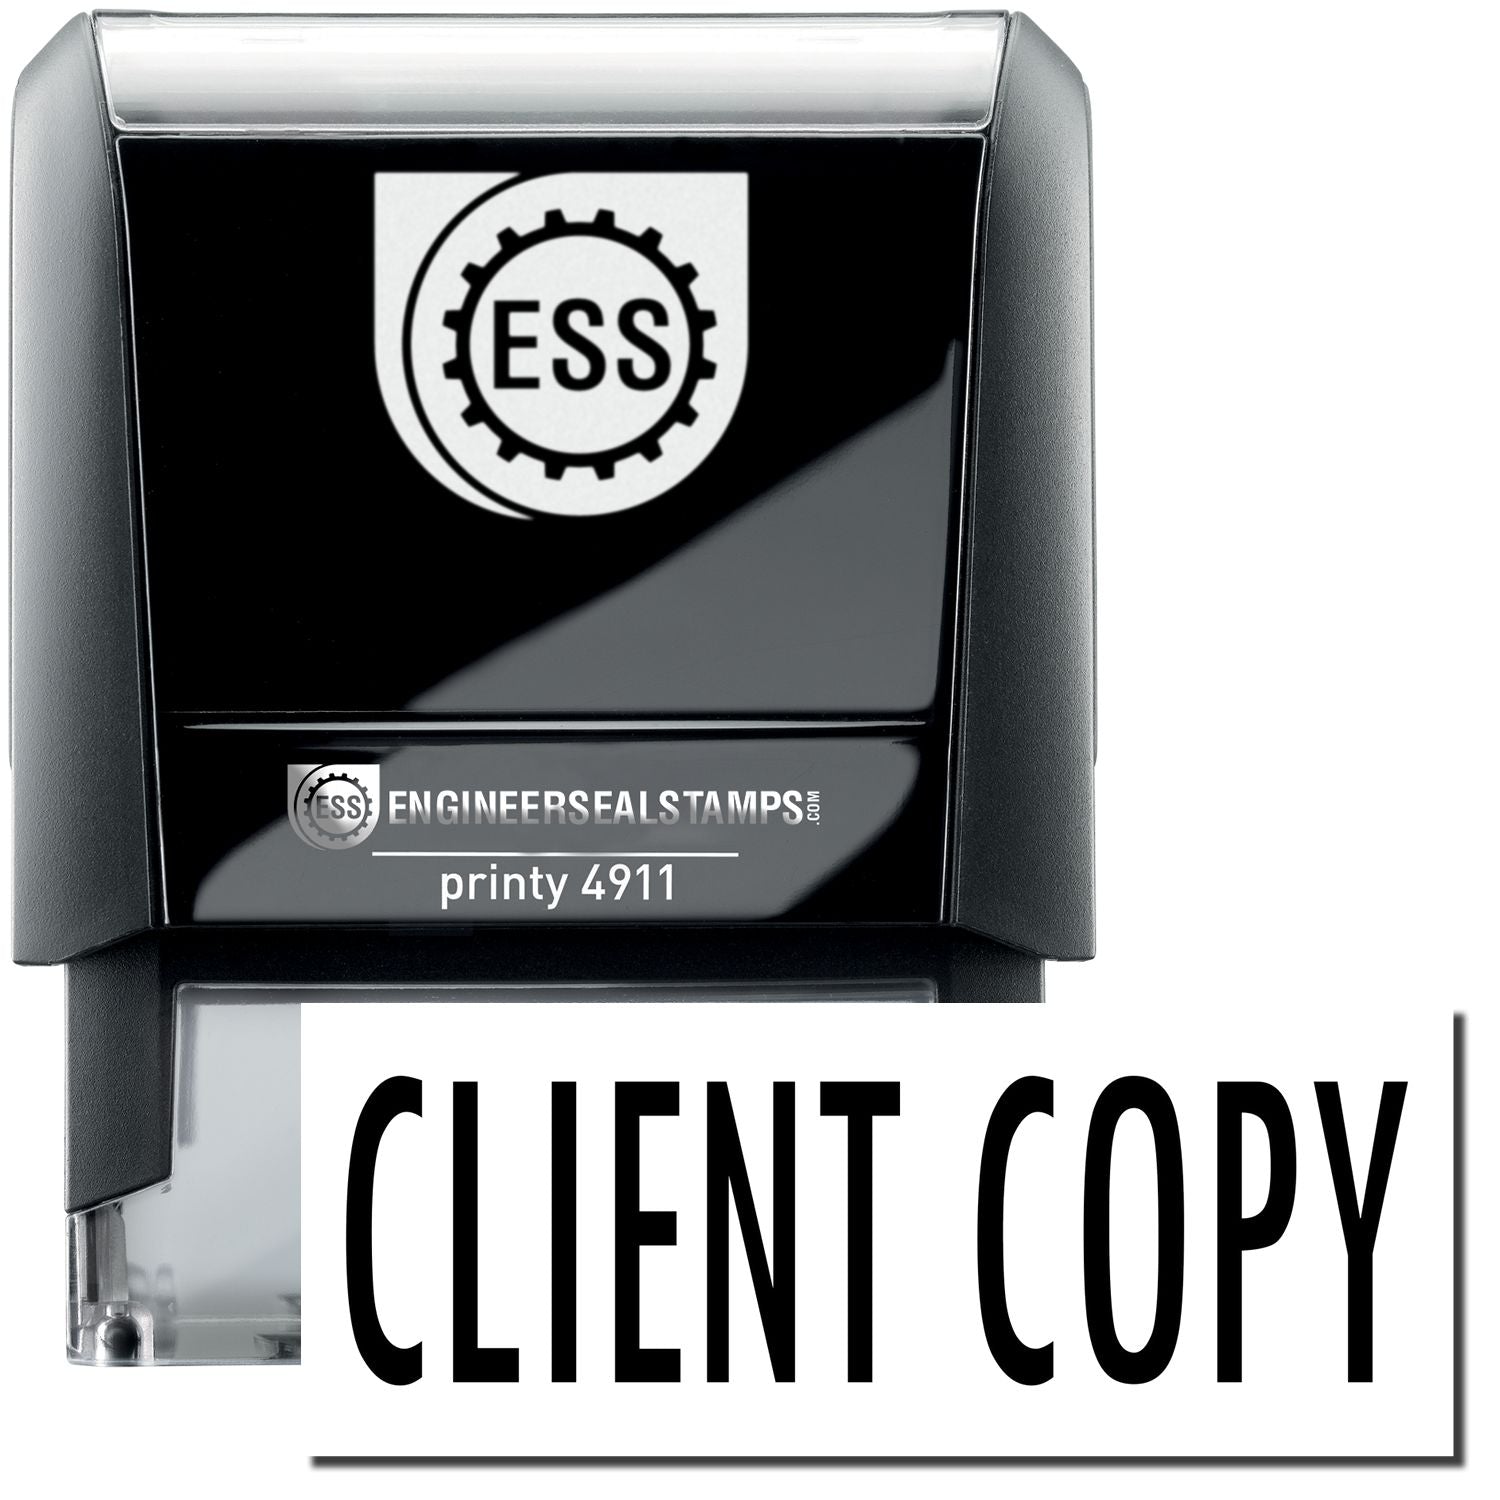 A self-inking stamp with a stamped image showing how the text "CLIENT COPY" is displayed after stamping.